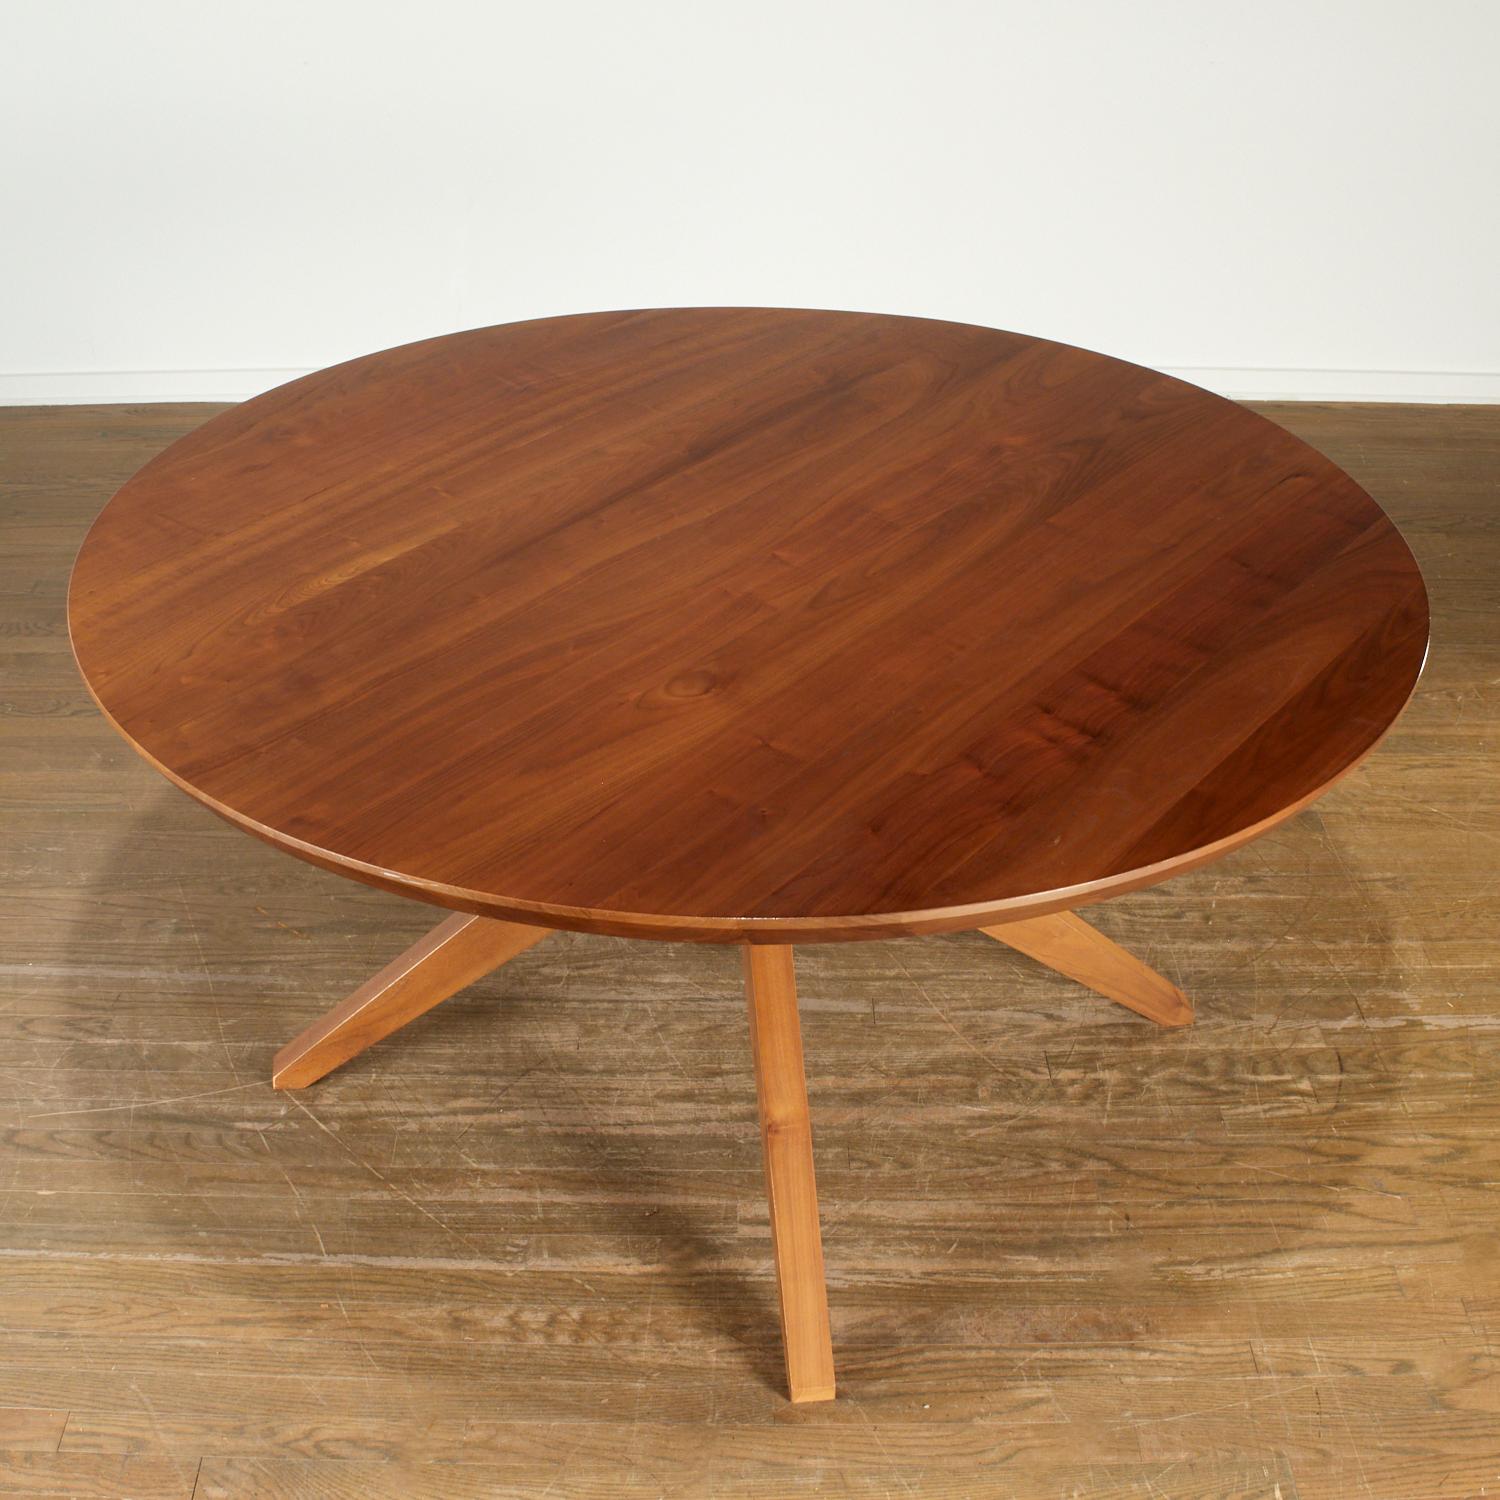 21st c., English design, solid walnut dining table, label to underside, The Cross Round Table by Matthew Hilton combines comfort with functionality while creating a contemporary piece of furniture. 

The chamfered edge detail gives a lightweight